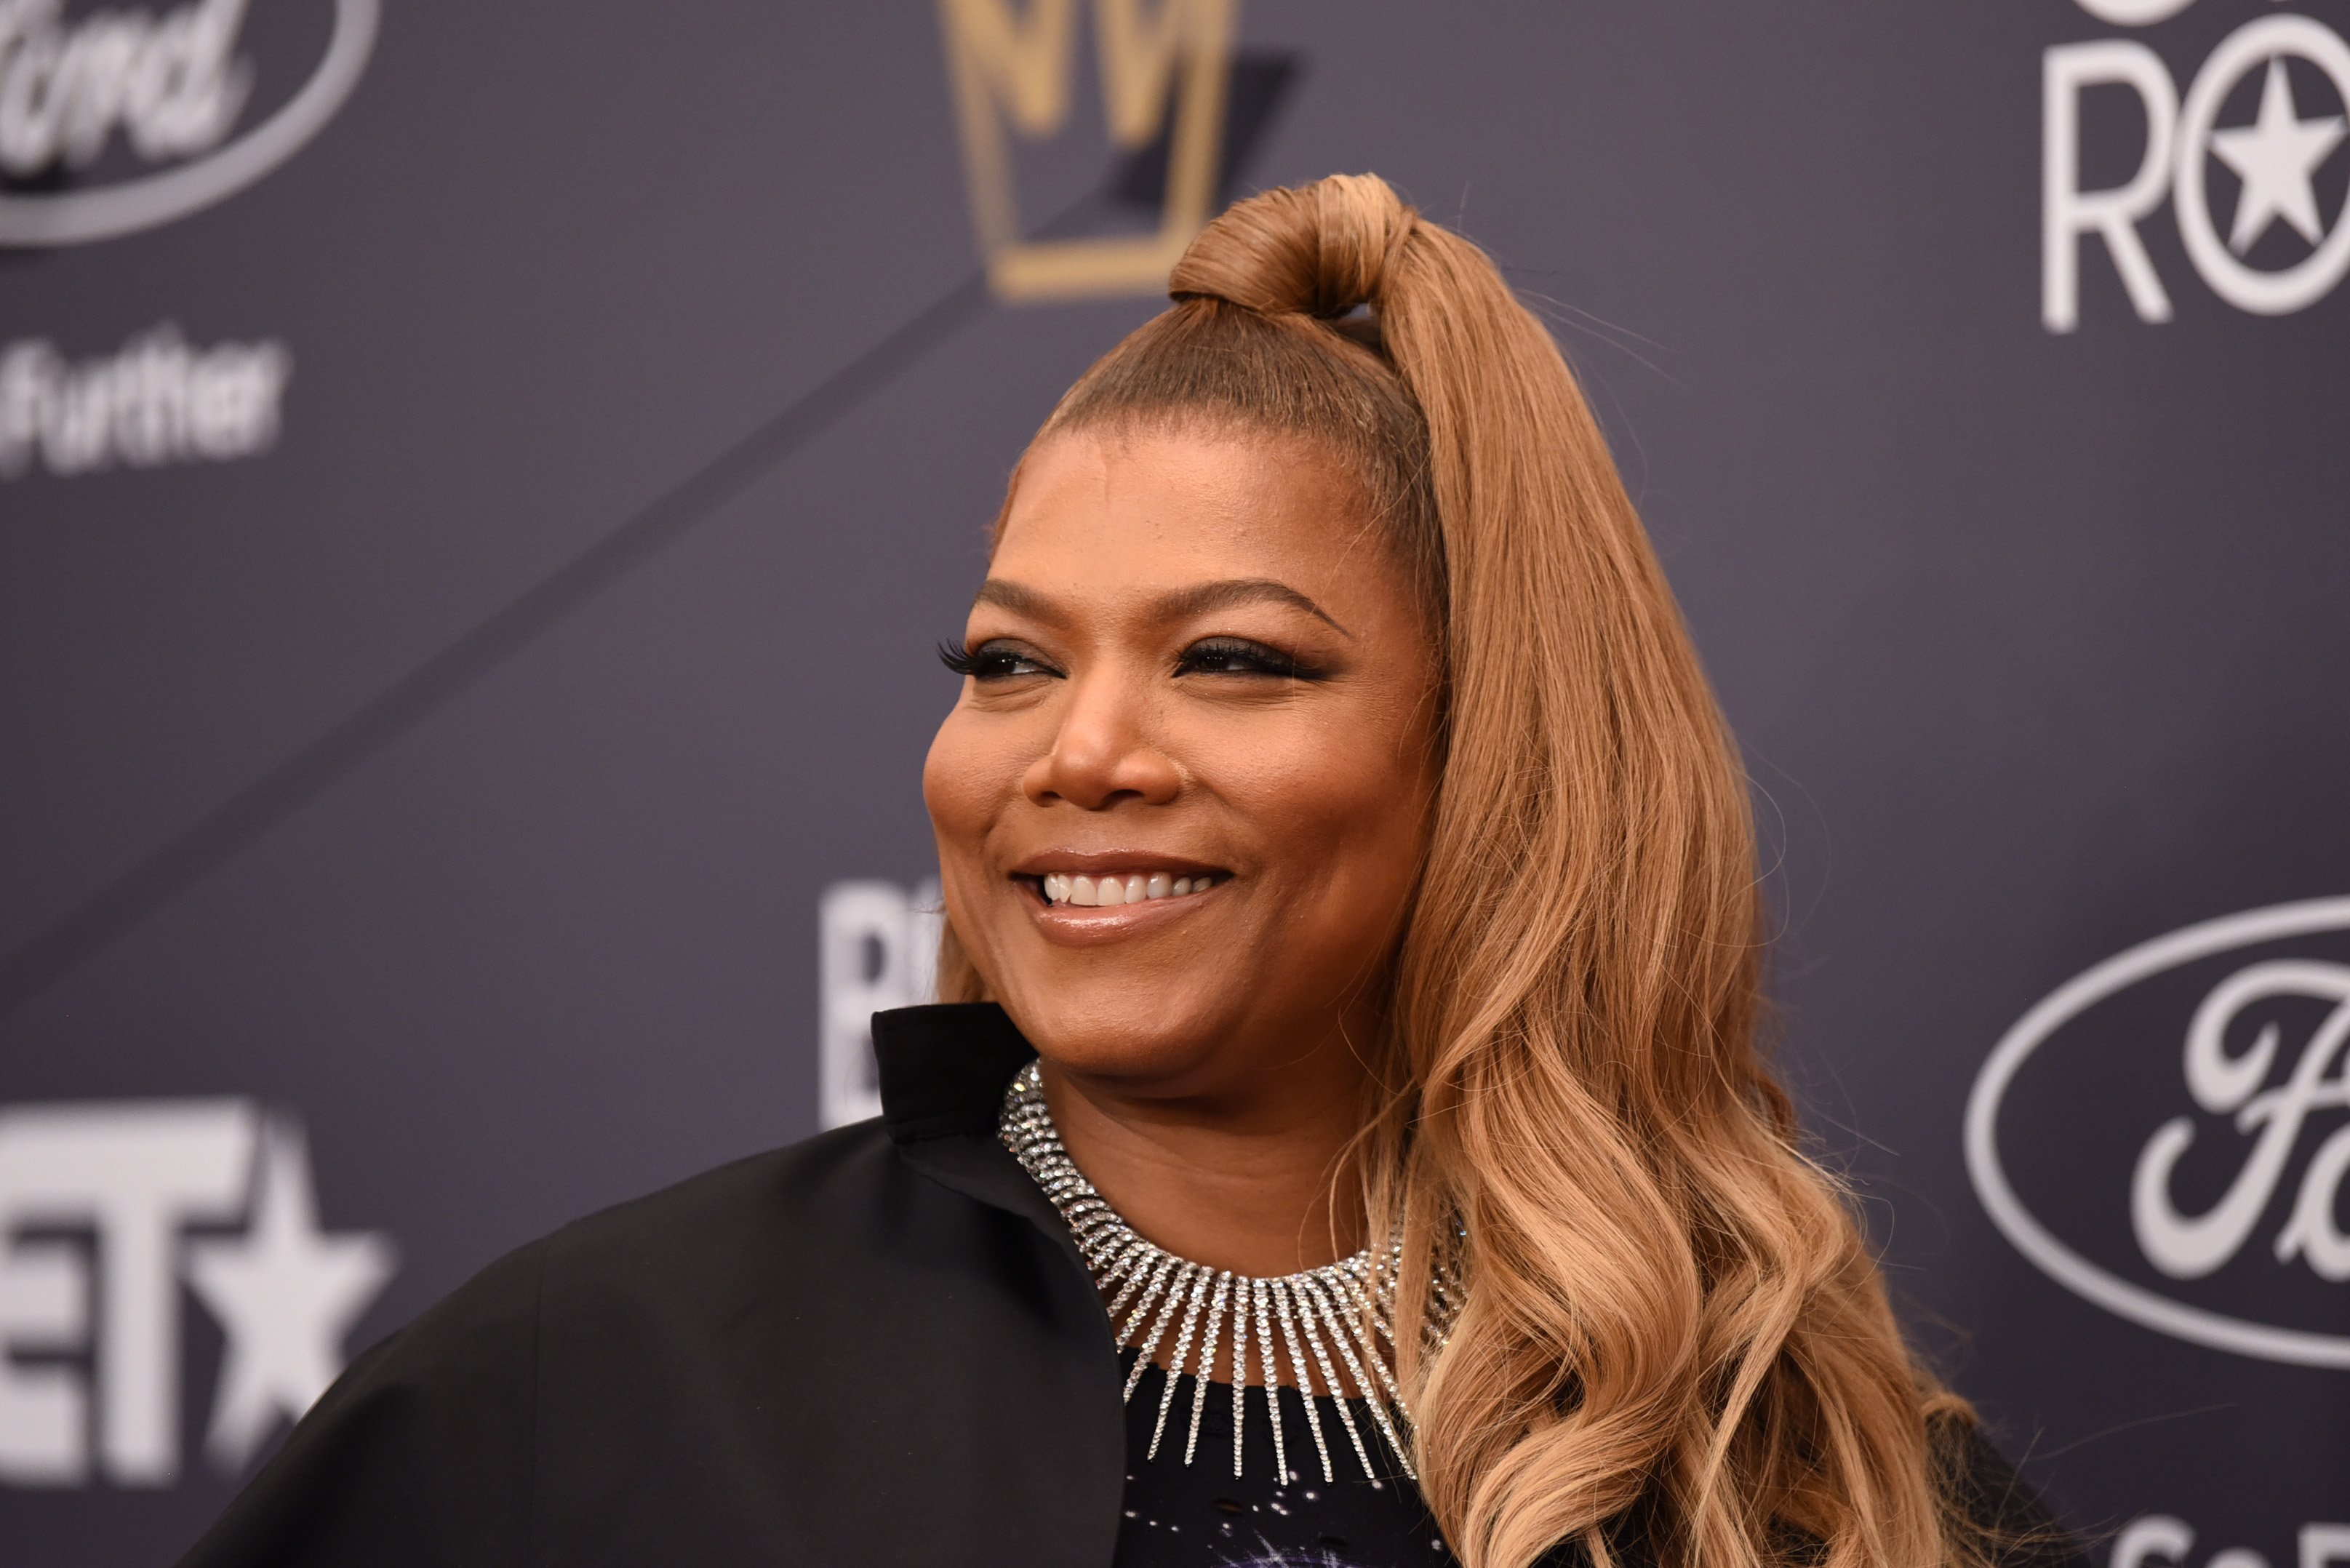 Queen Latifah at the Black Girls Rock! 2018 Red Carpet on Aug. 26, 2018 in New Jersey | Photo: Getty Images 